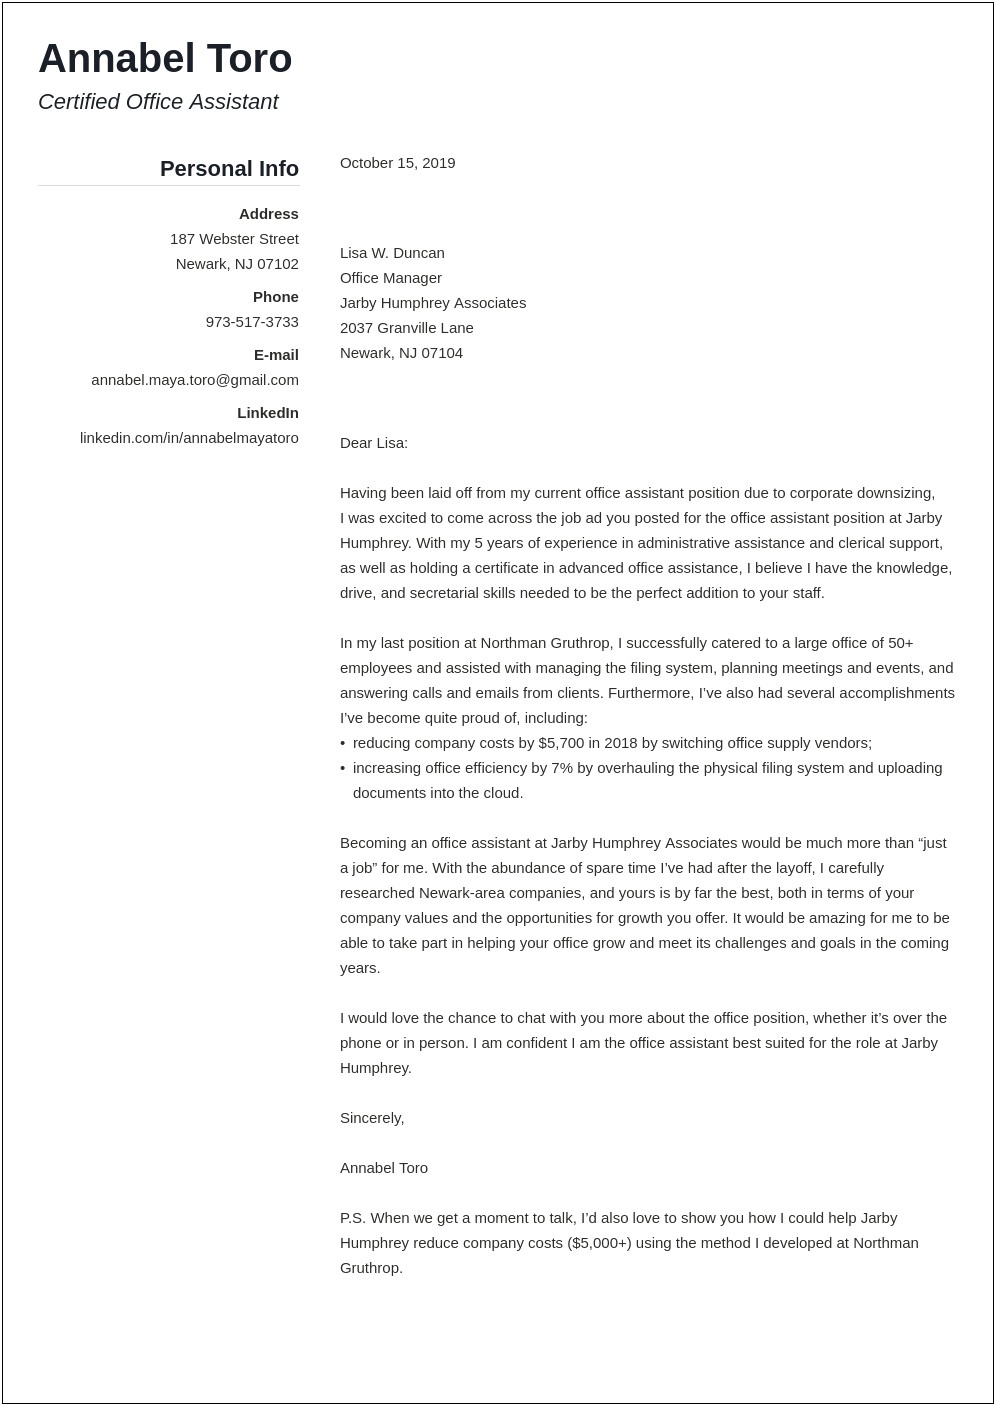 Sample Resonse Letter To Resume For Interview